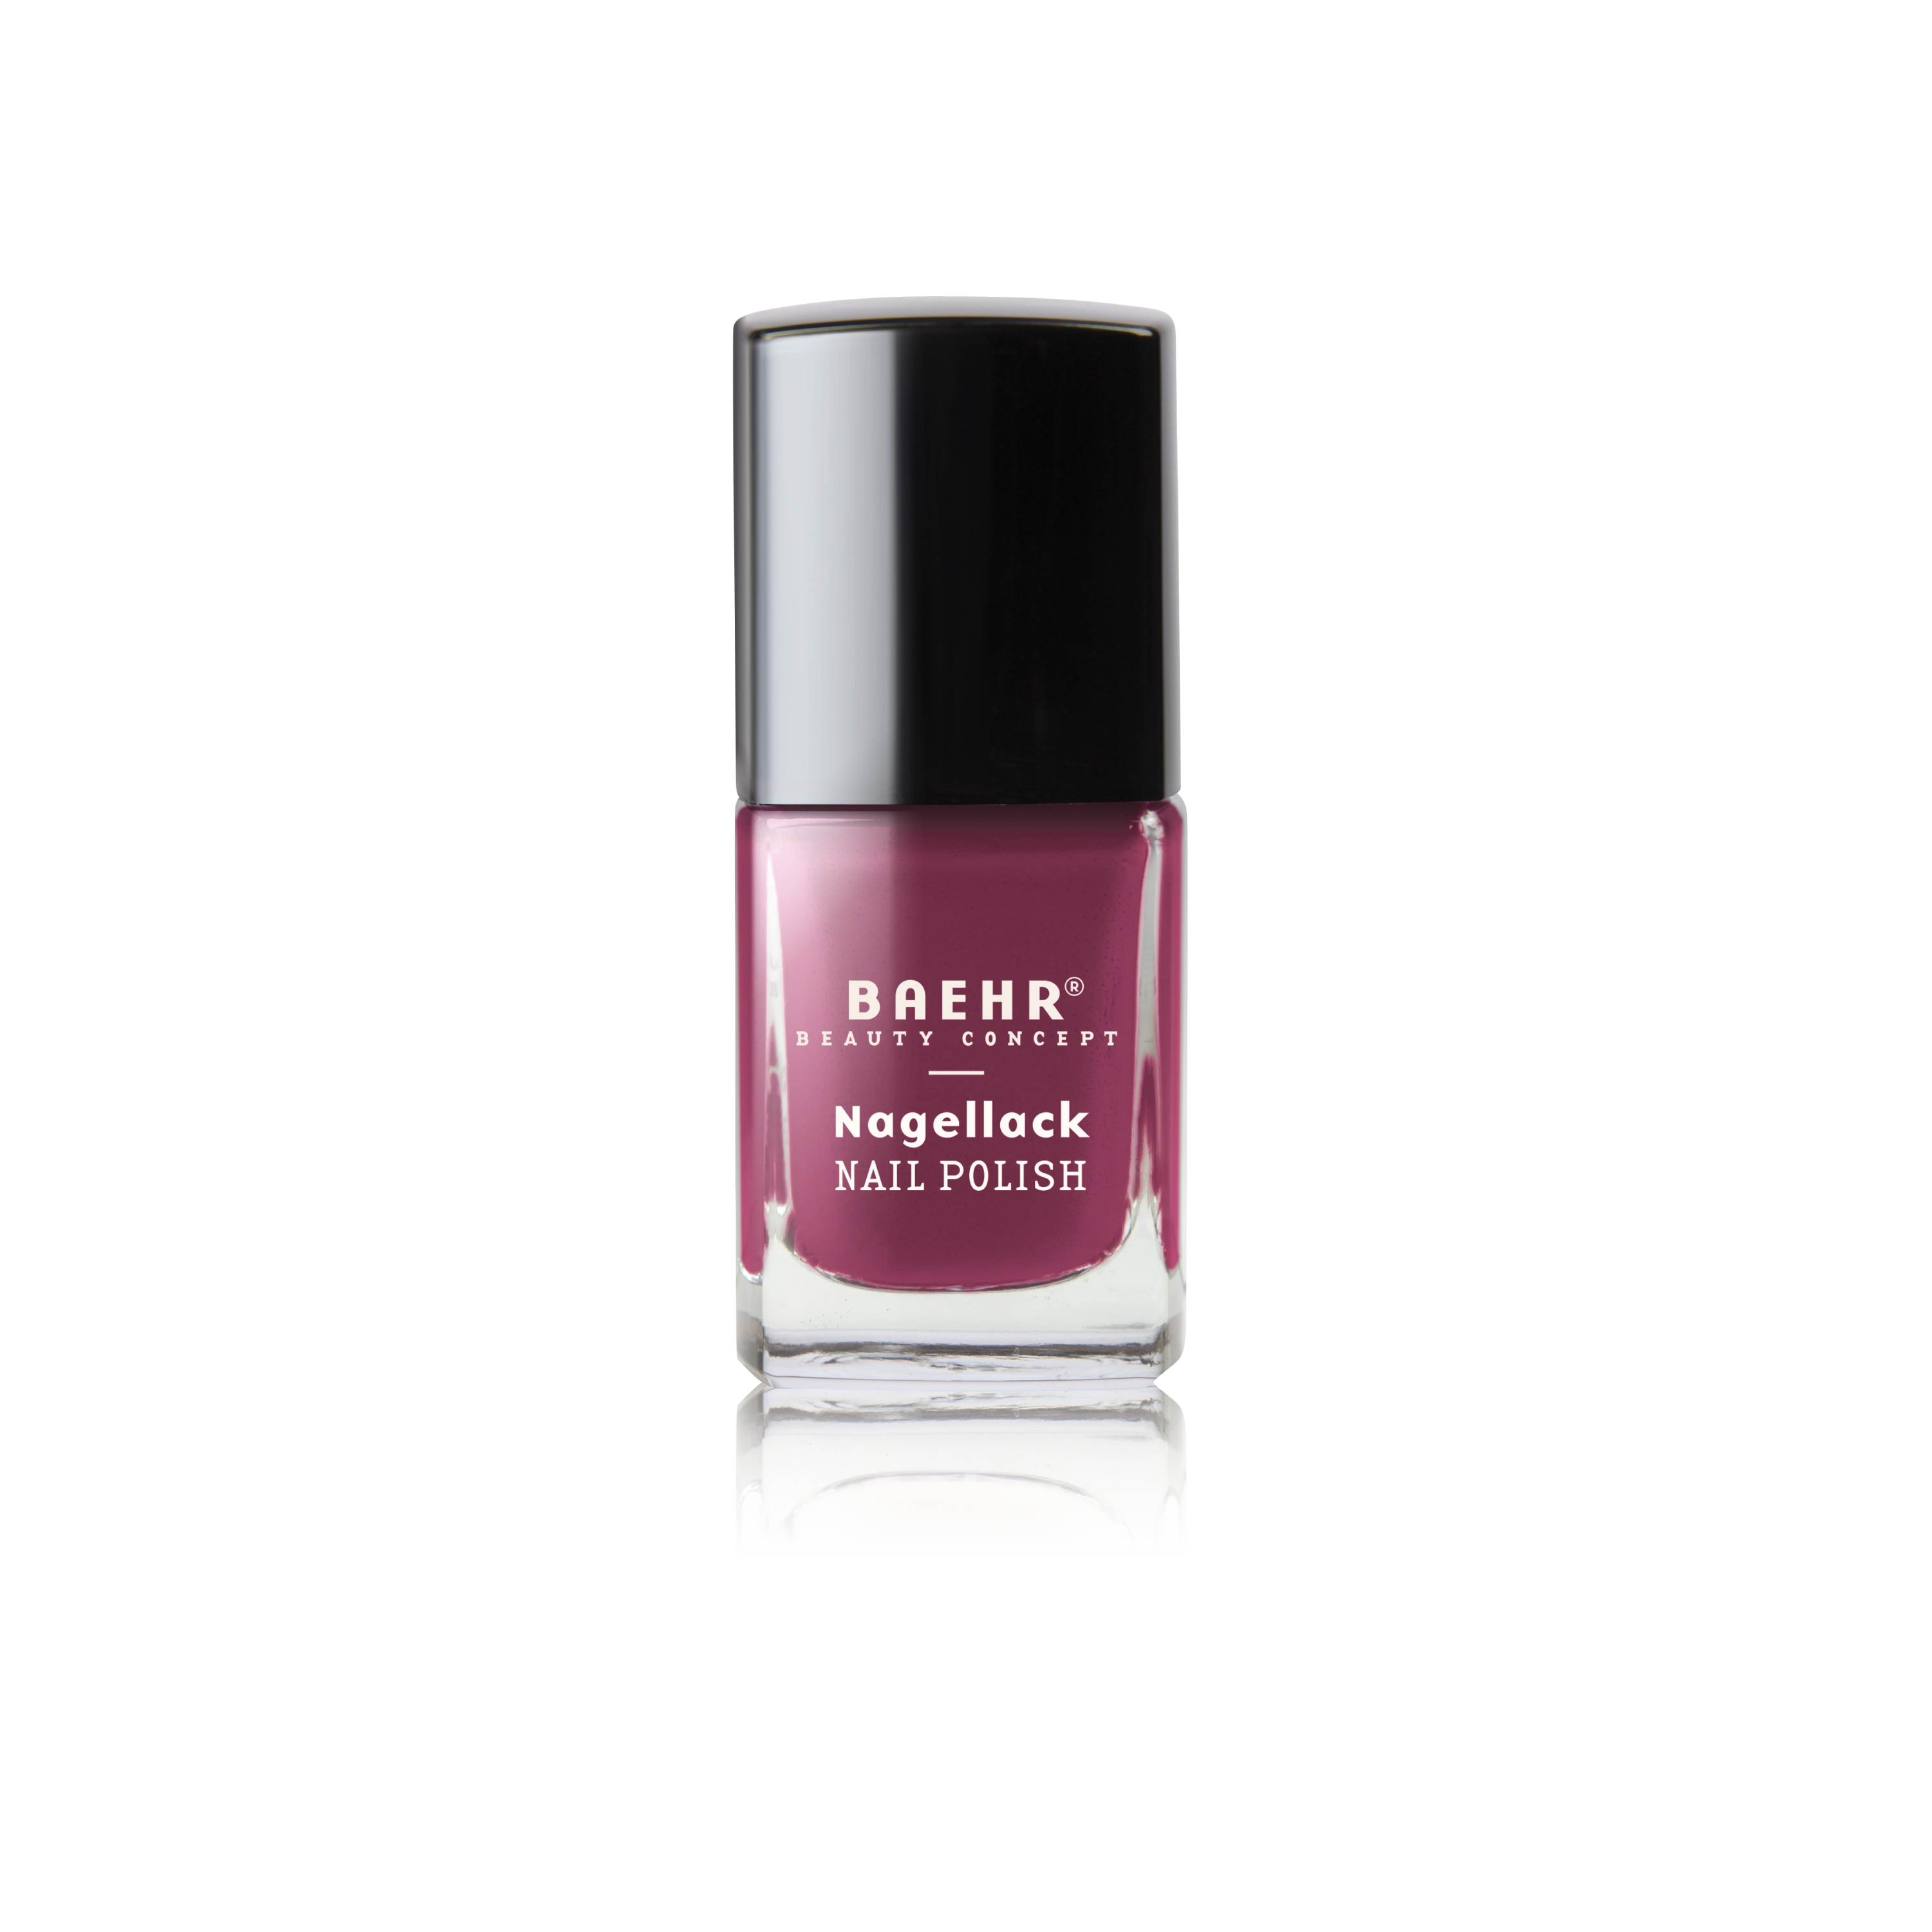 BAEHR BEAUTY CONCEPT - NAILS Nagellack Sweet Rose 11 ml